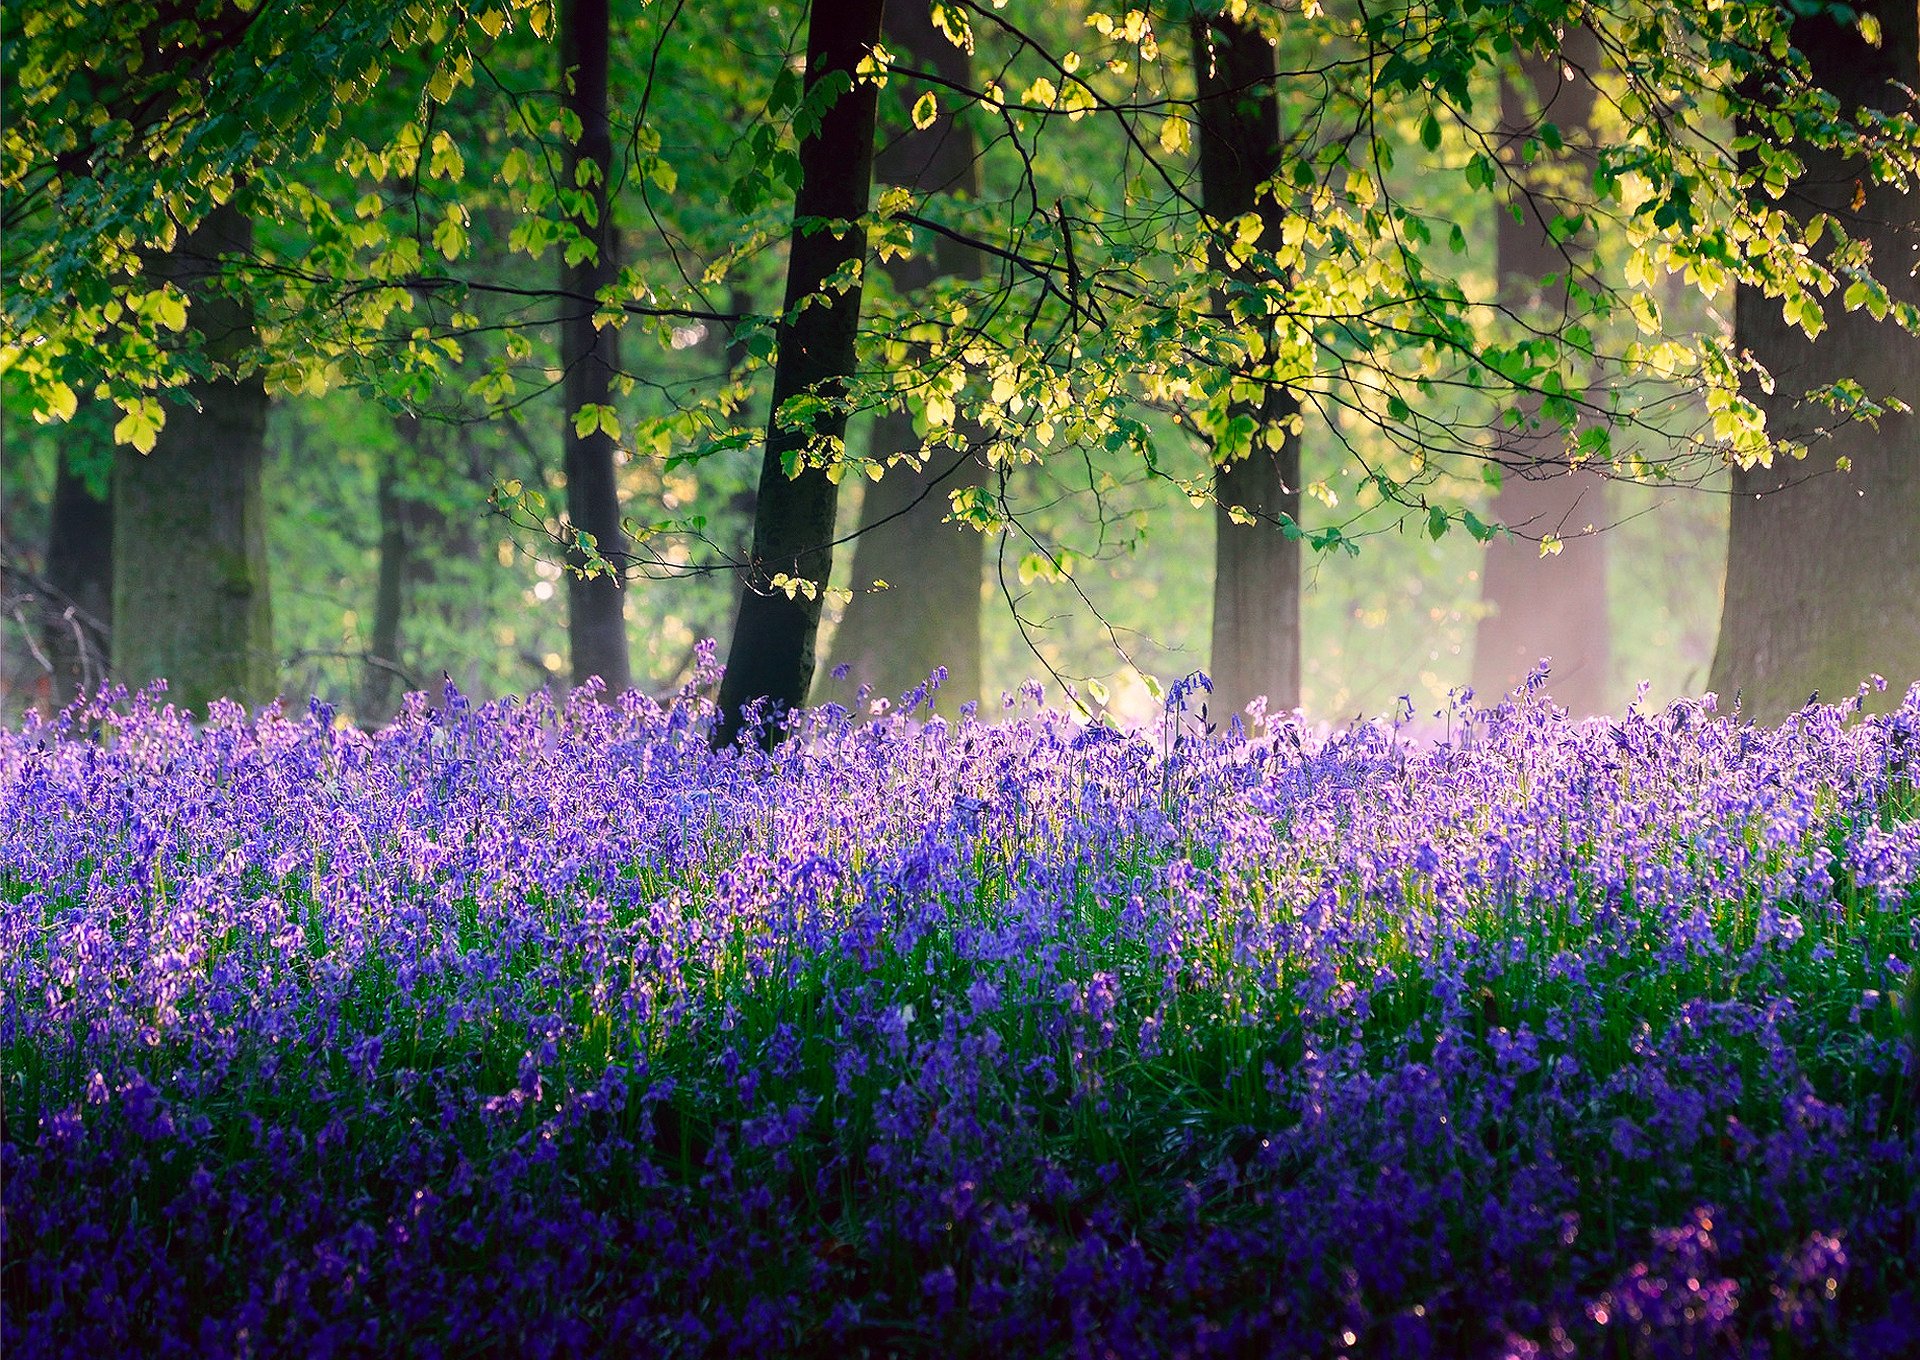 Trees Flowers SPRING May fores wallpaper 1920x1360 553810 1920x1360